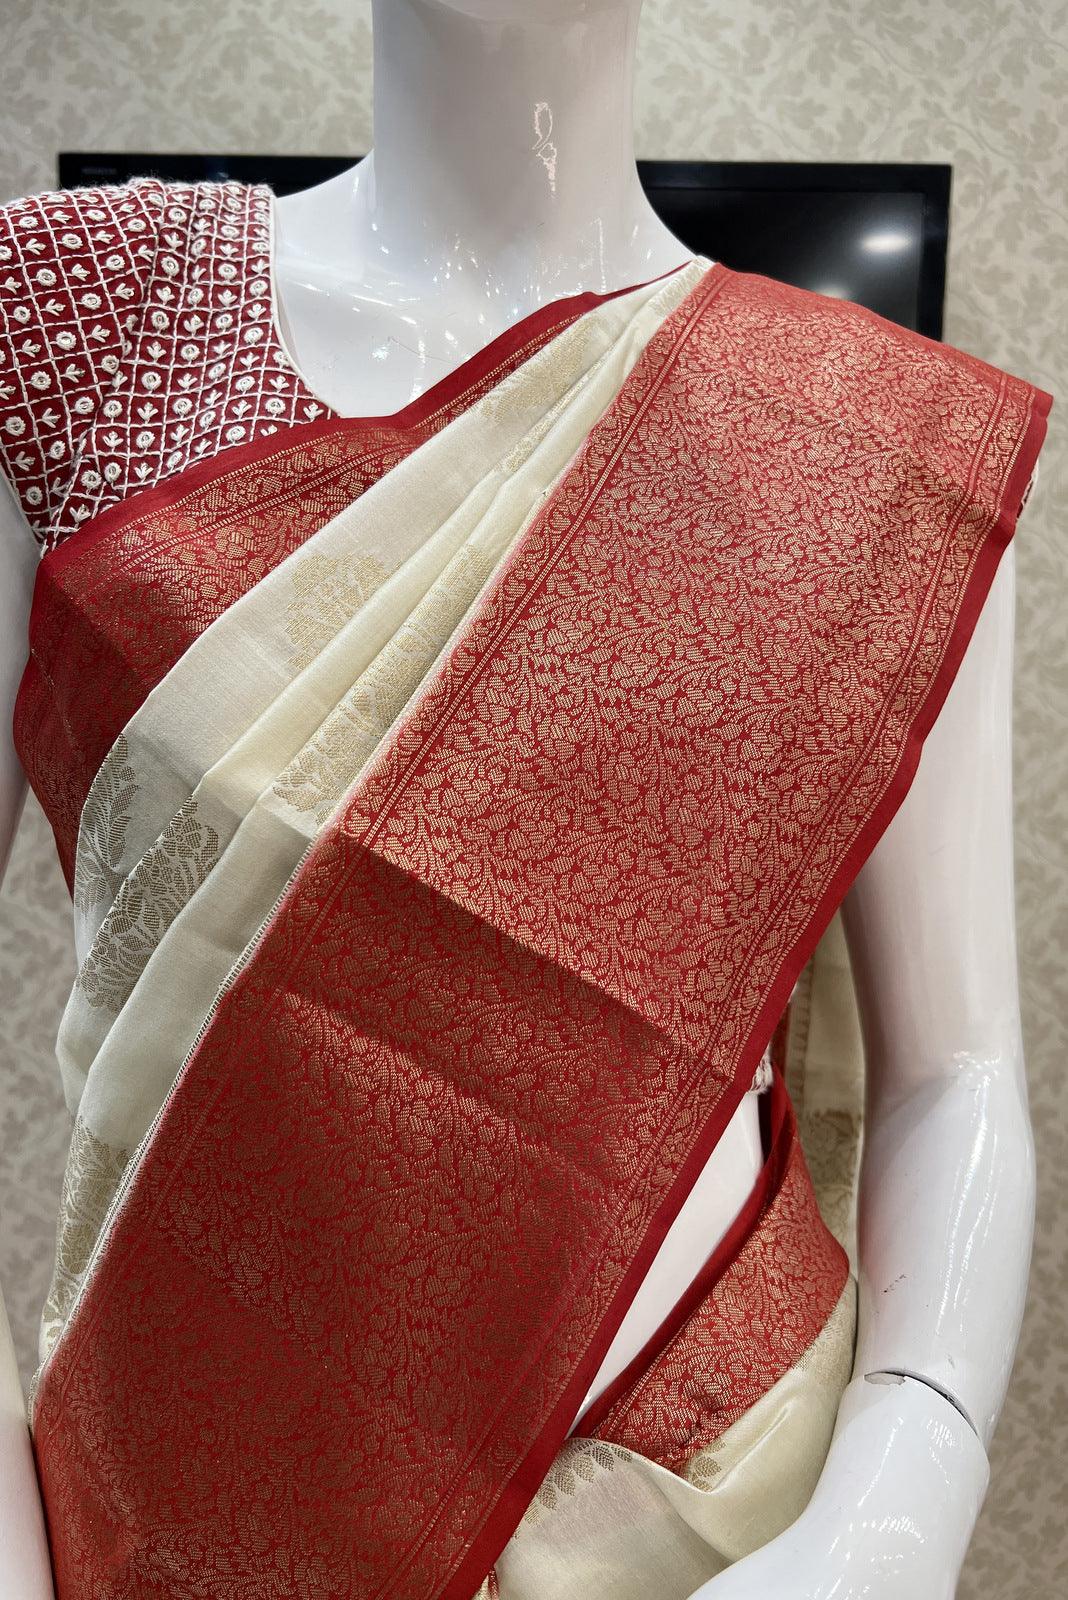 Sandal with Red Banaras Saree and Matching Unstitched Blouse - Seasons Chennai